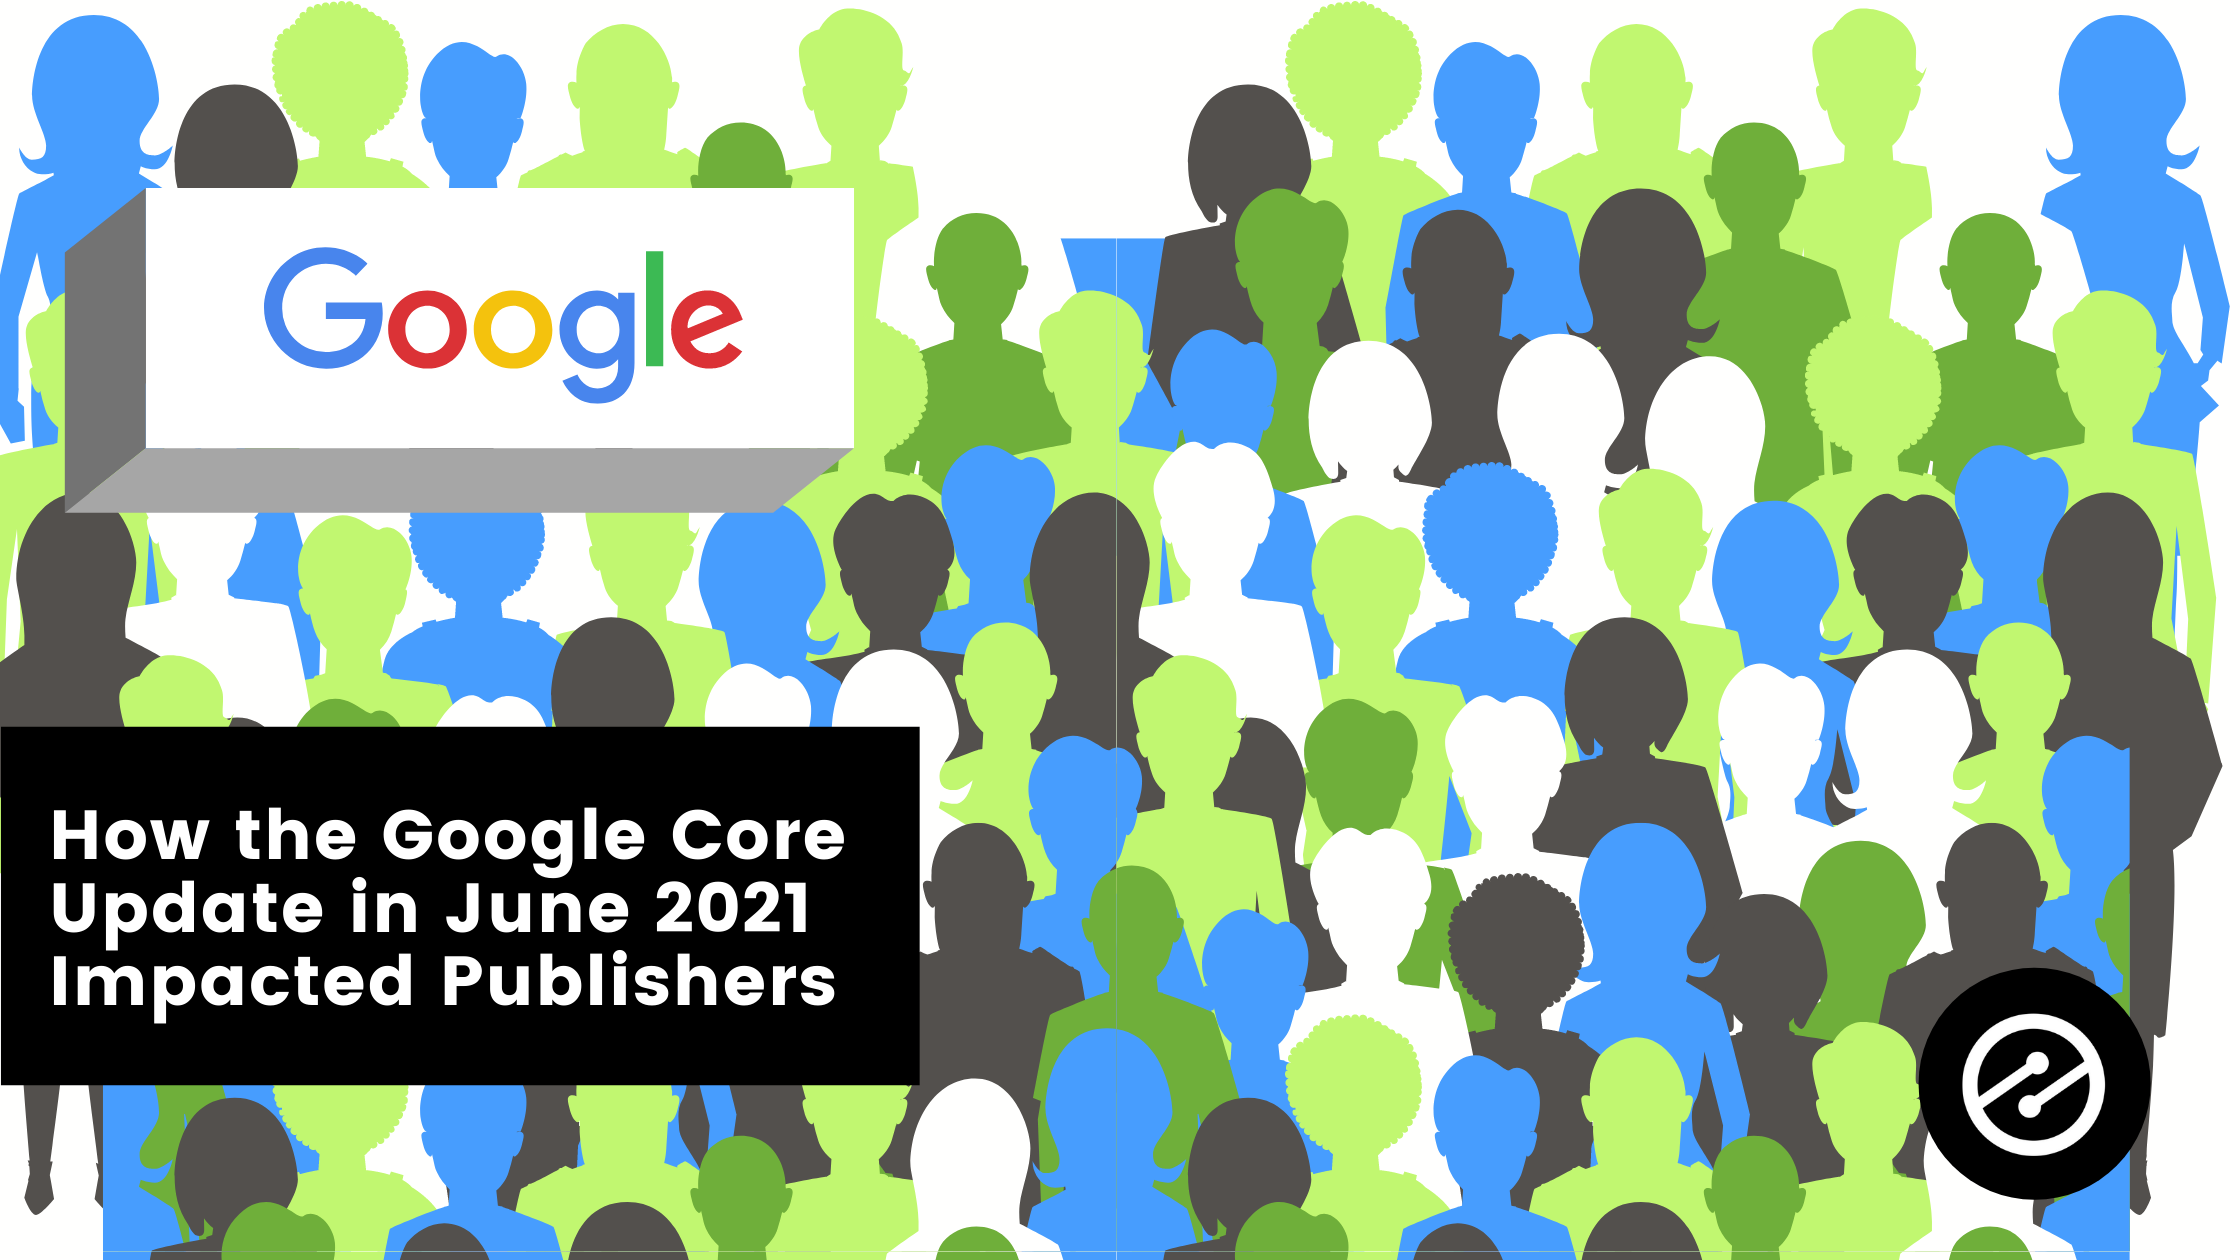 How The Google Core Update in June 2021 Impacted Publishers